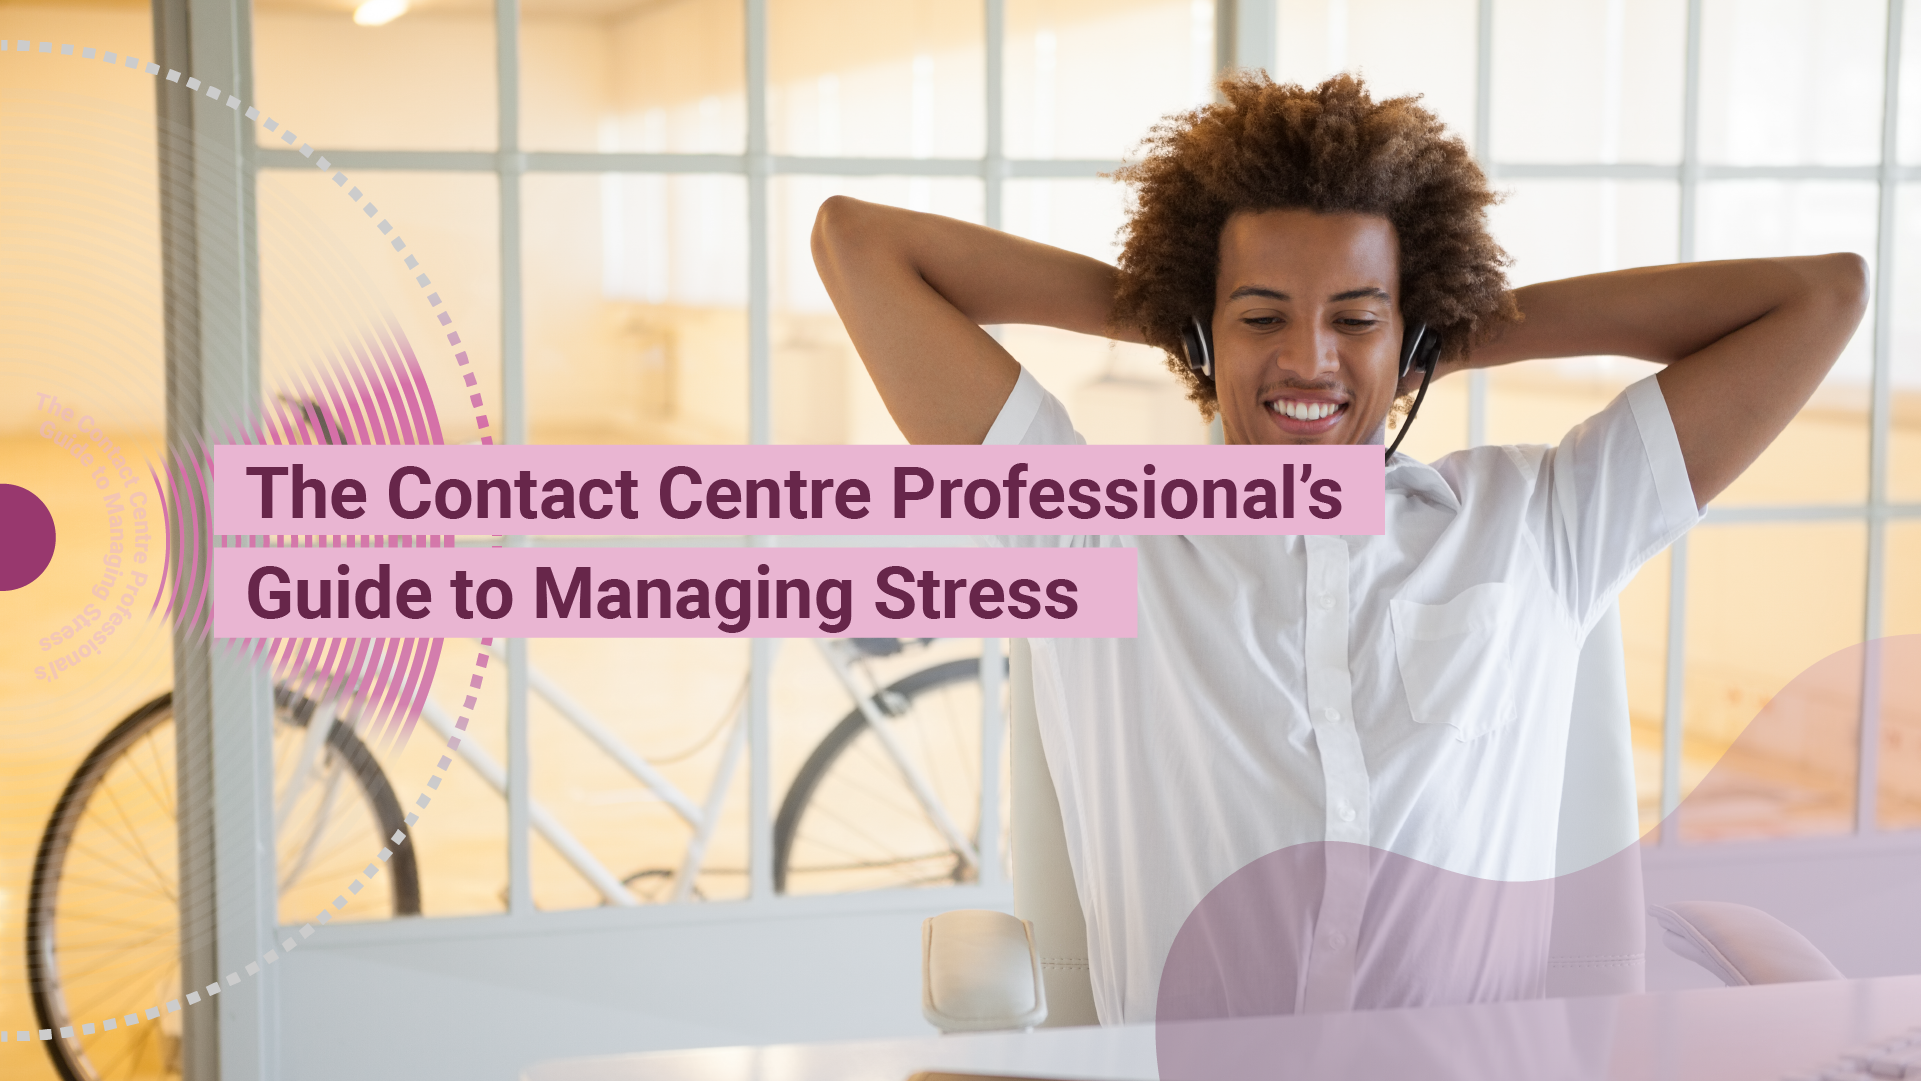 https://omnistackconnect.omnihrc.com/product/the-contact-centre-professionals-guide-to-managing-stress